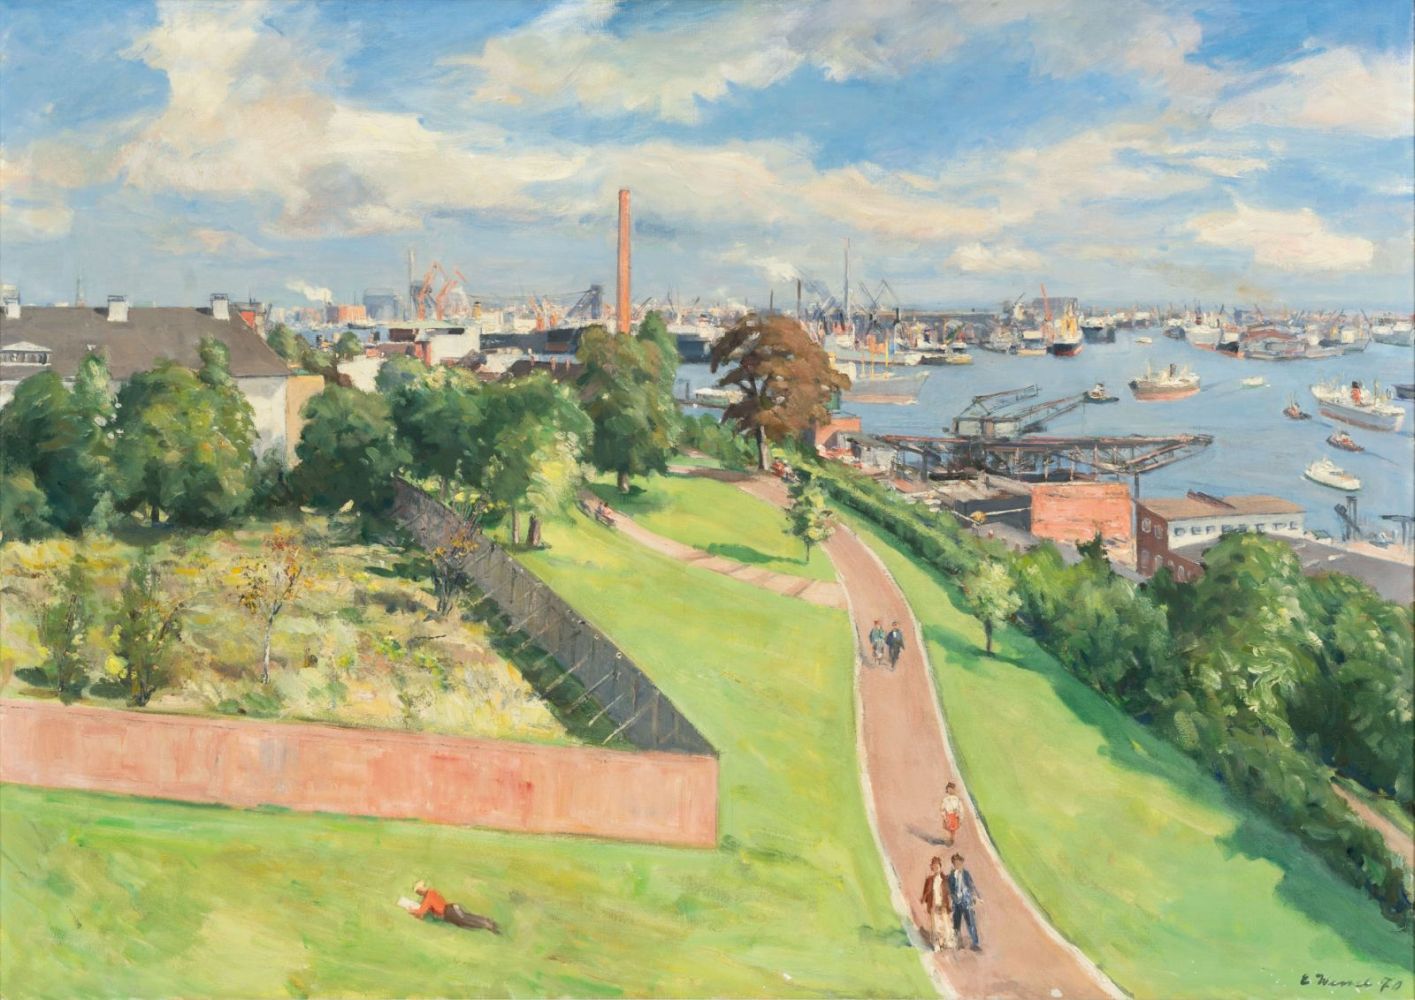 Wessel, Erich (Hamburg 1906 - Hamburg 1985). View from the Palmaille onto the Port.